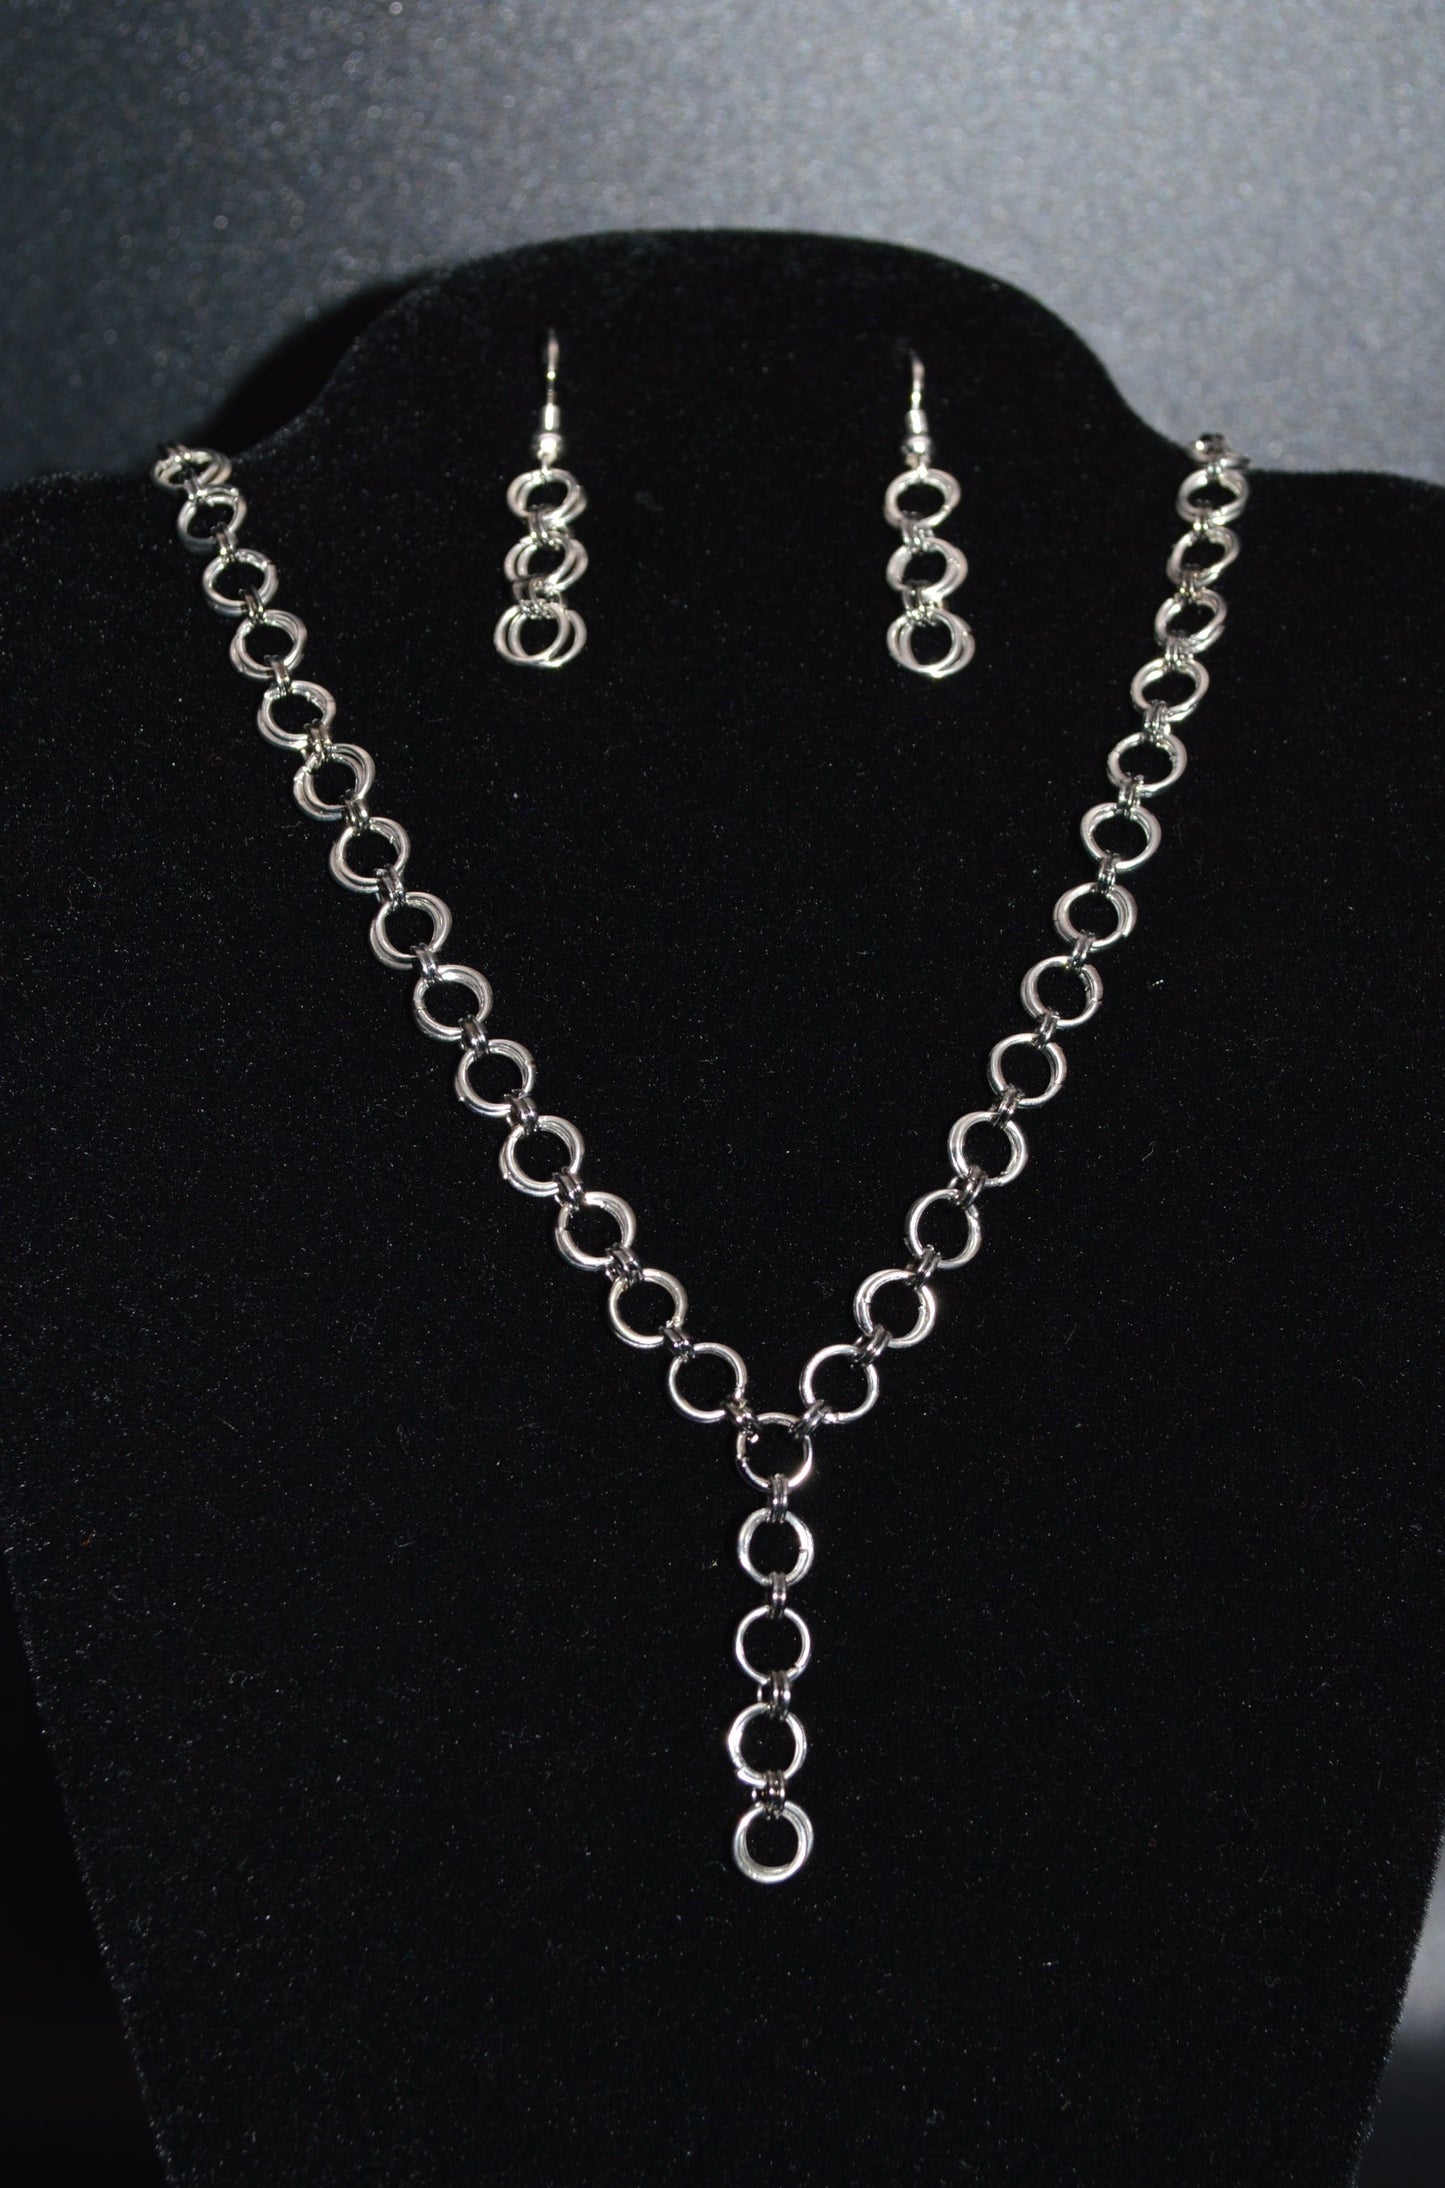 Silver and Gunmetal Black Hand Linked Chainmail Necklace and Earring Set